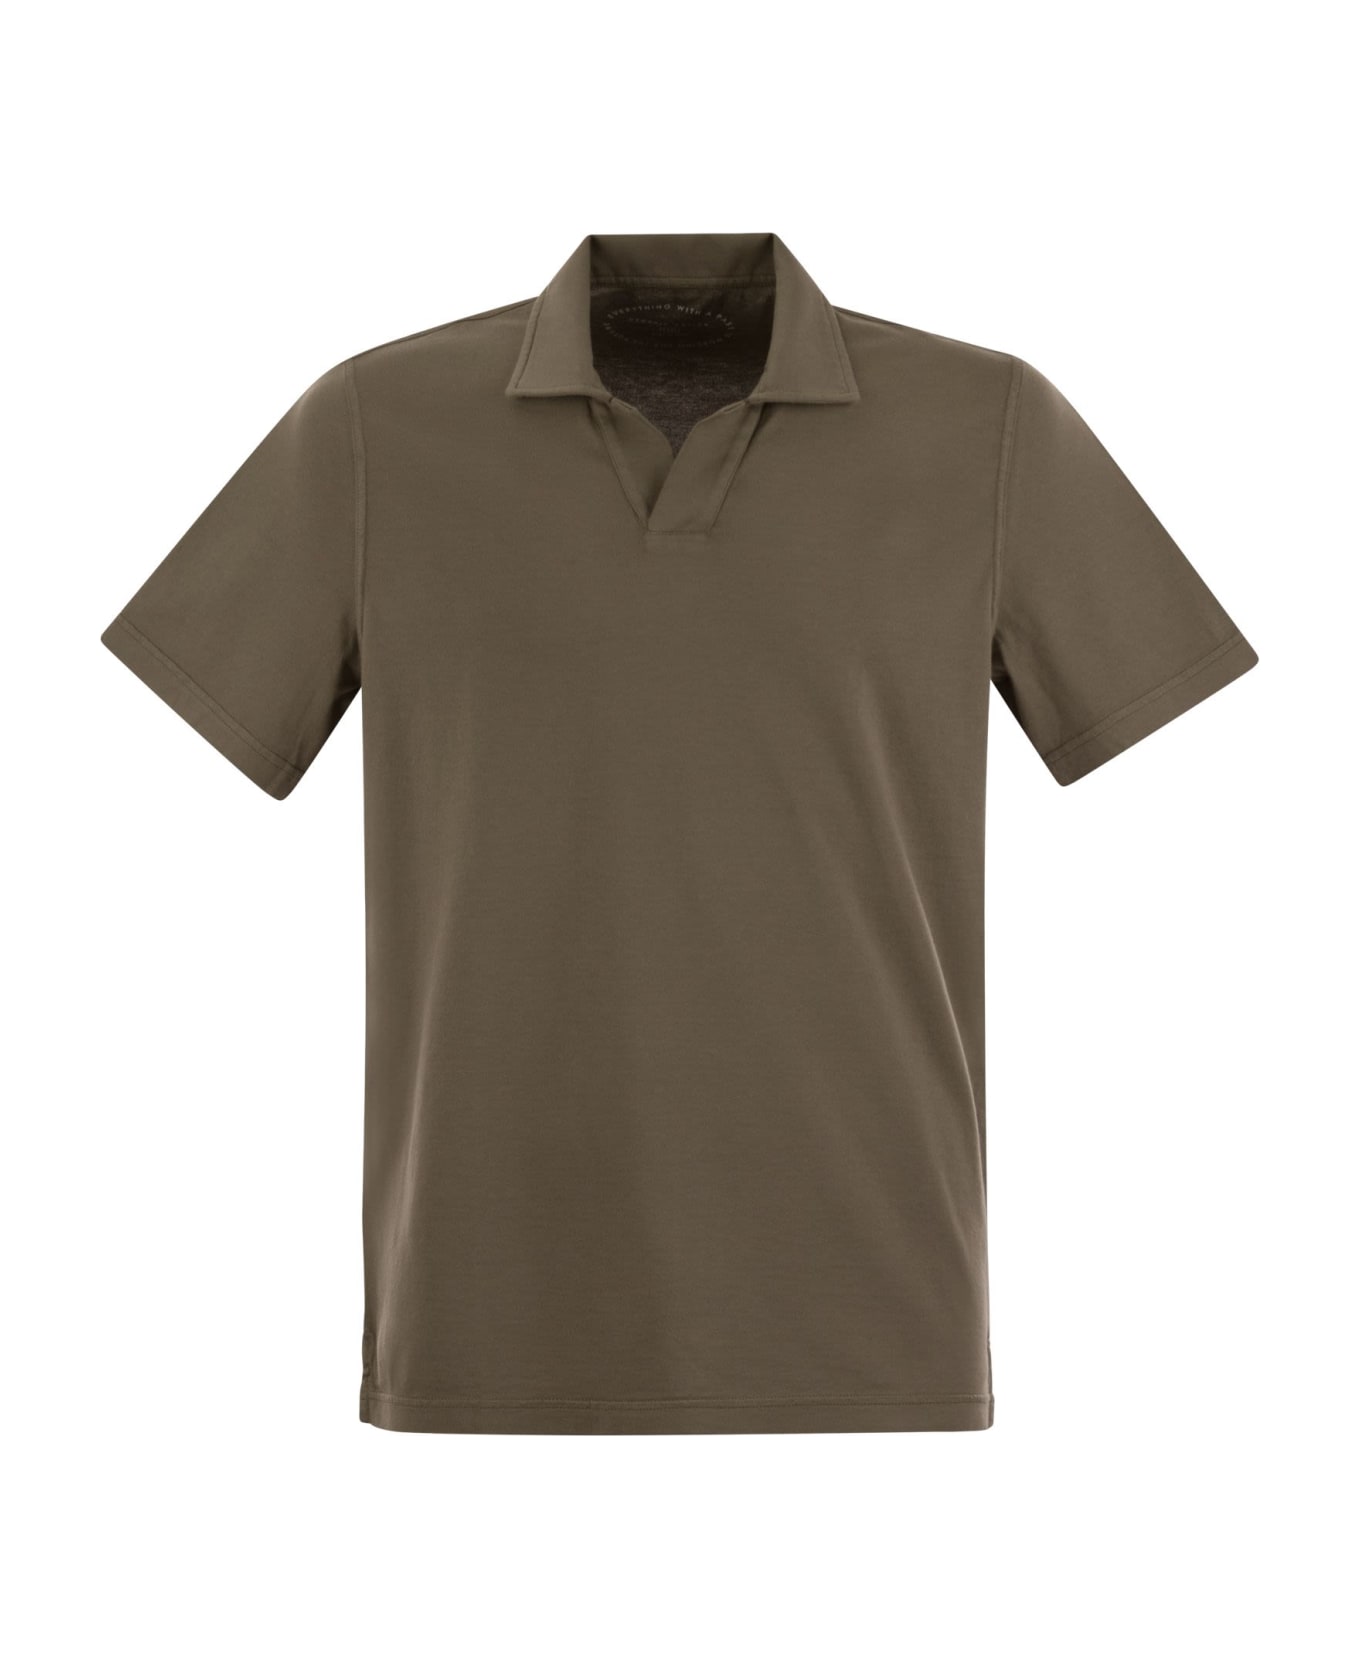 Fedeli Cotton Polo Shirt With Open Collar - Brown ポロシャツ